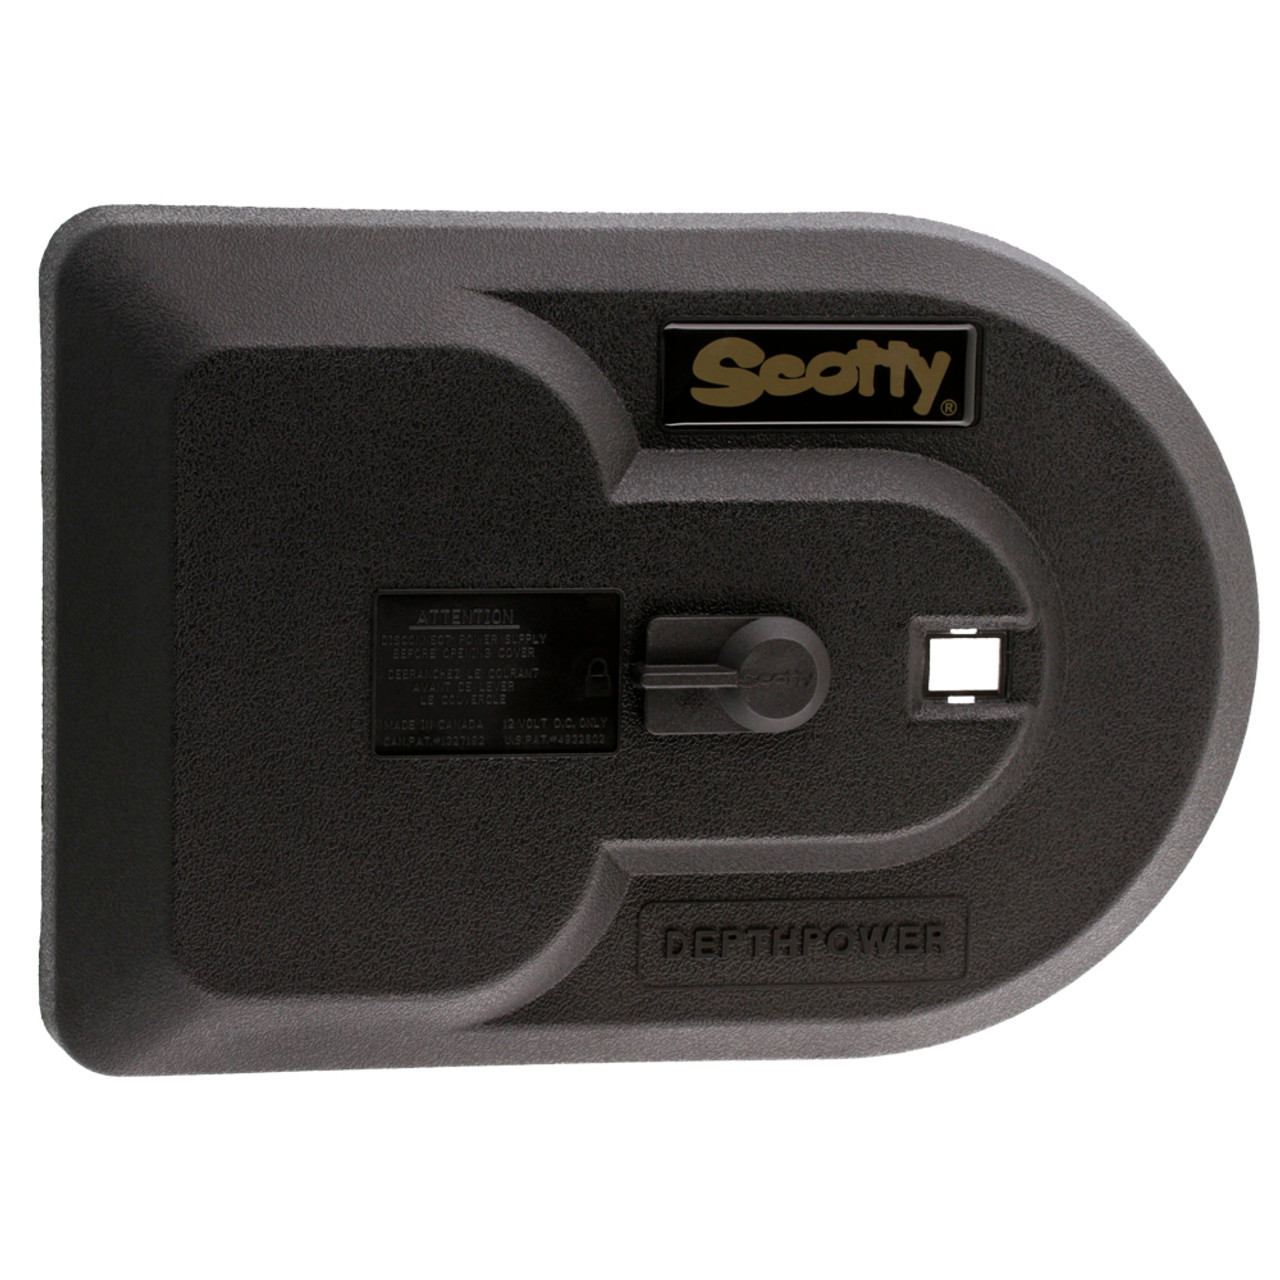 SCOTTY DEPTHPOWER REPLACEMENT LID S1131